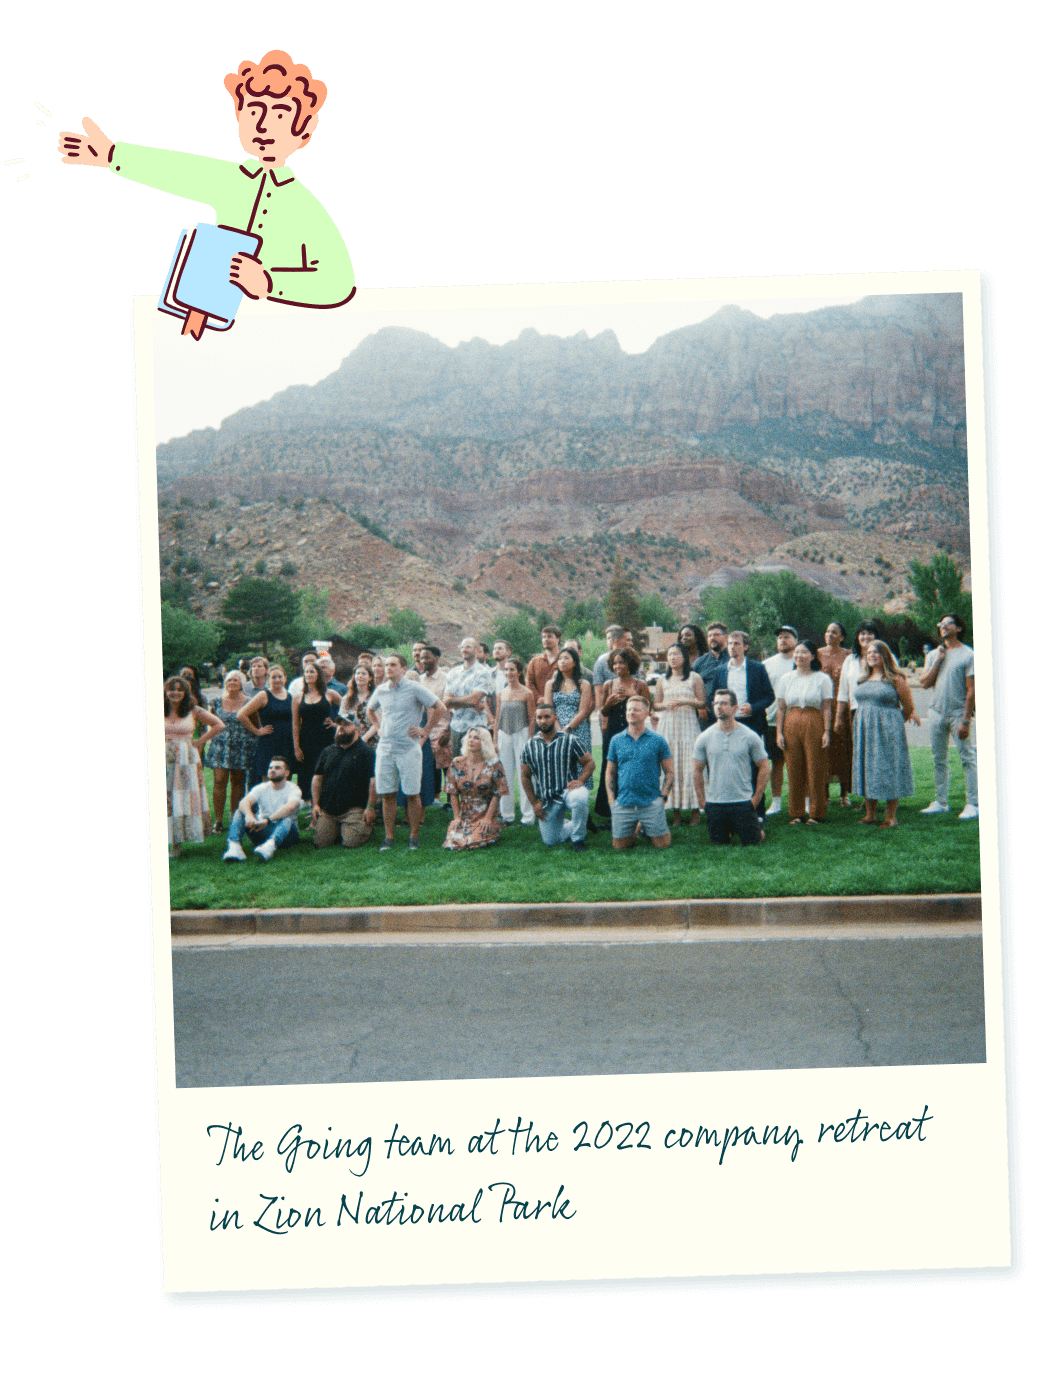 Image of Going team in Zion